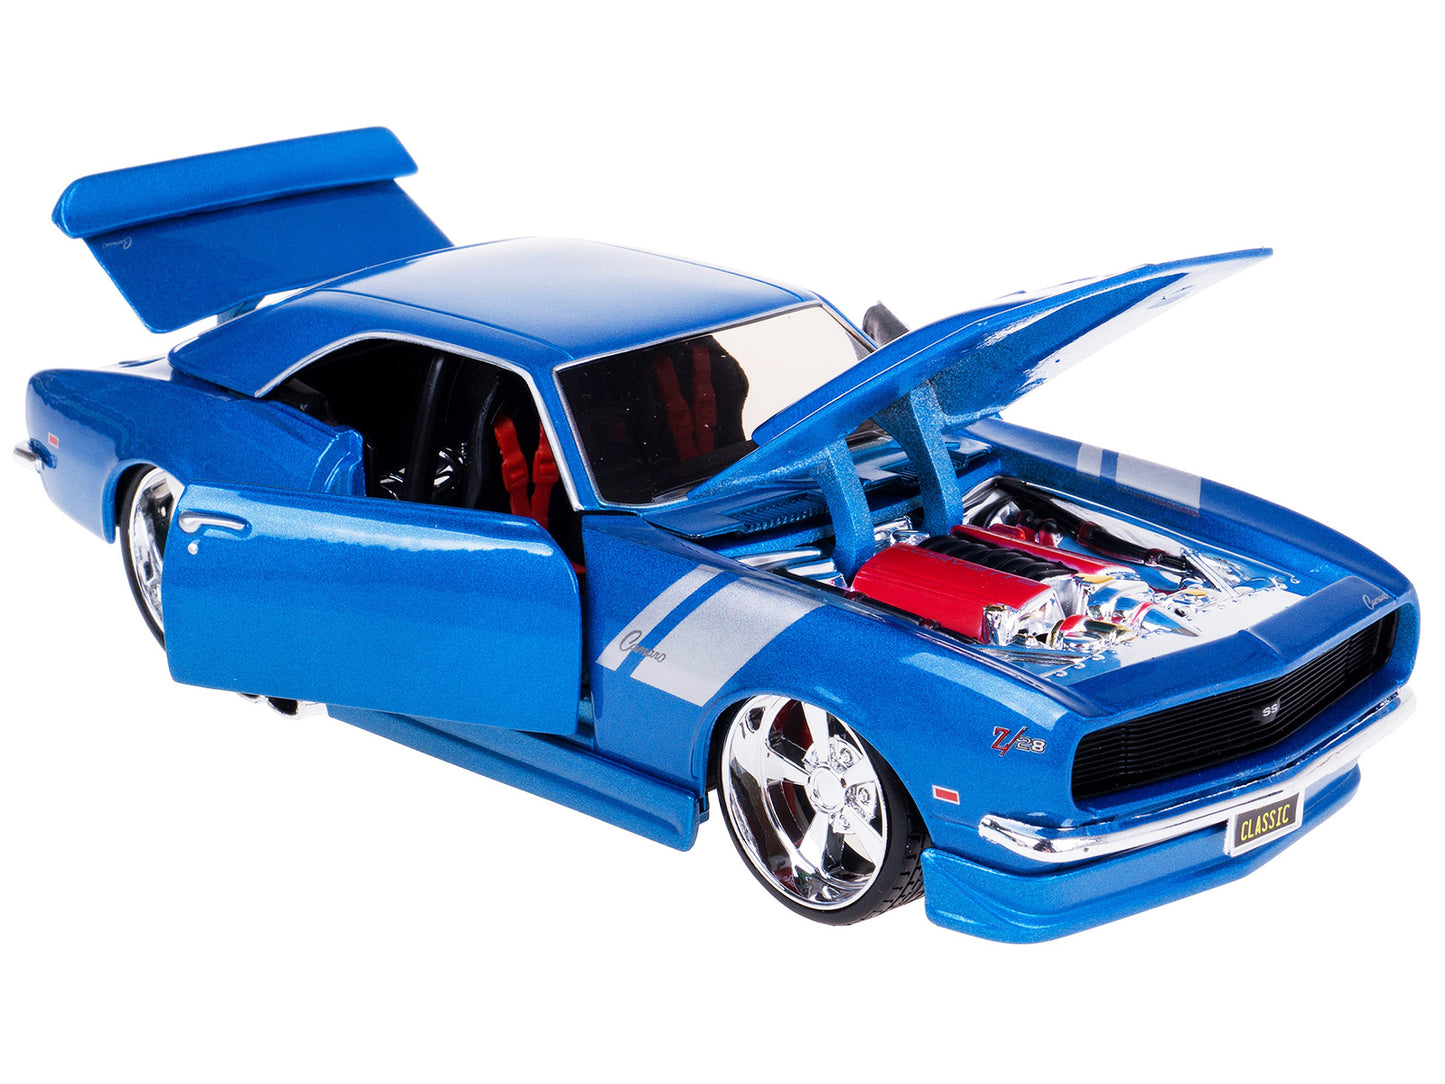 1968 Chevrolet Camaro Z/28 Blue Metallic with Silver Stripes "Classic Muscle" Series 1/24 Diecast Model Car by Maisto